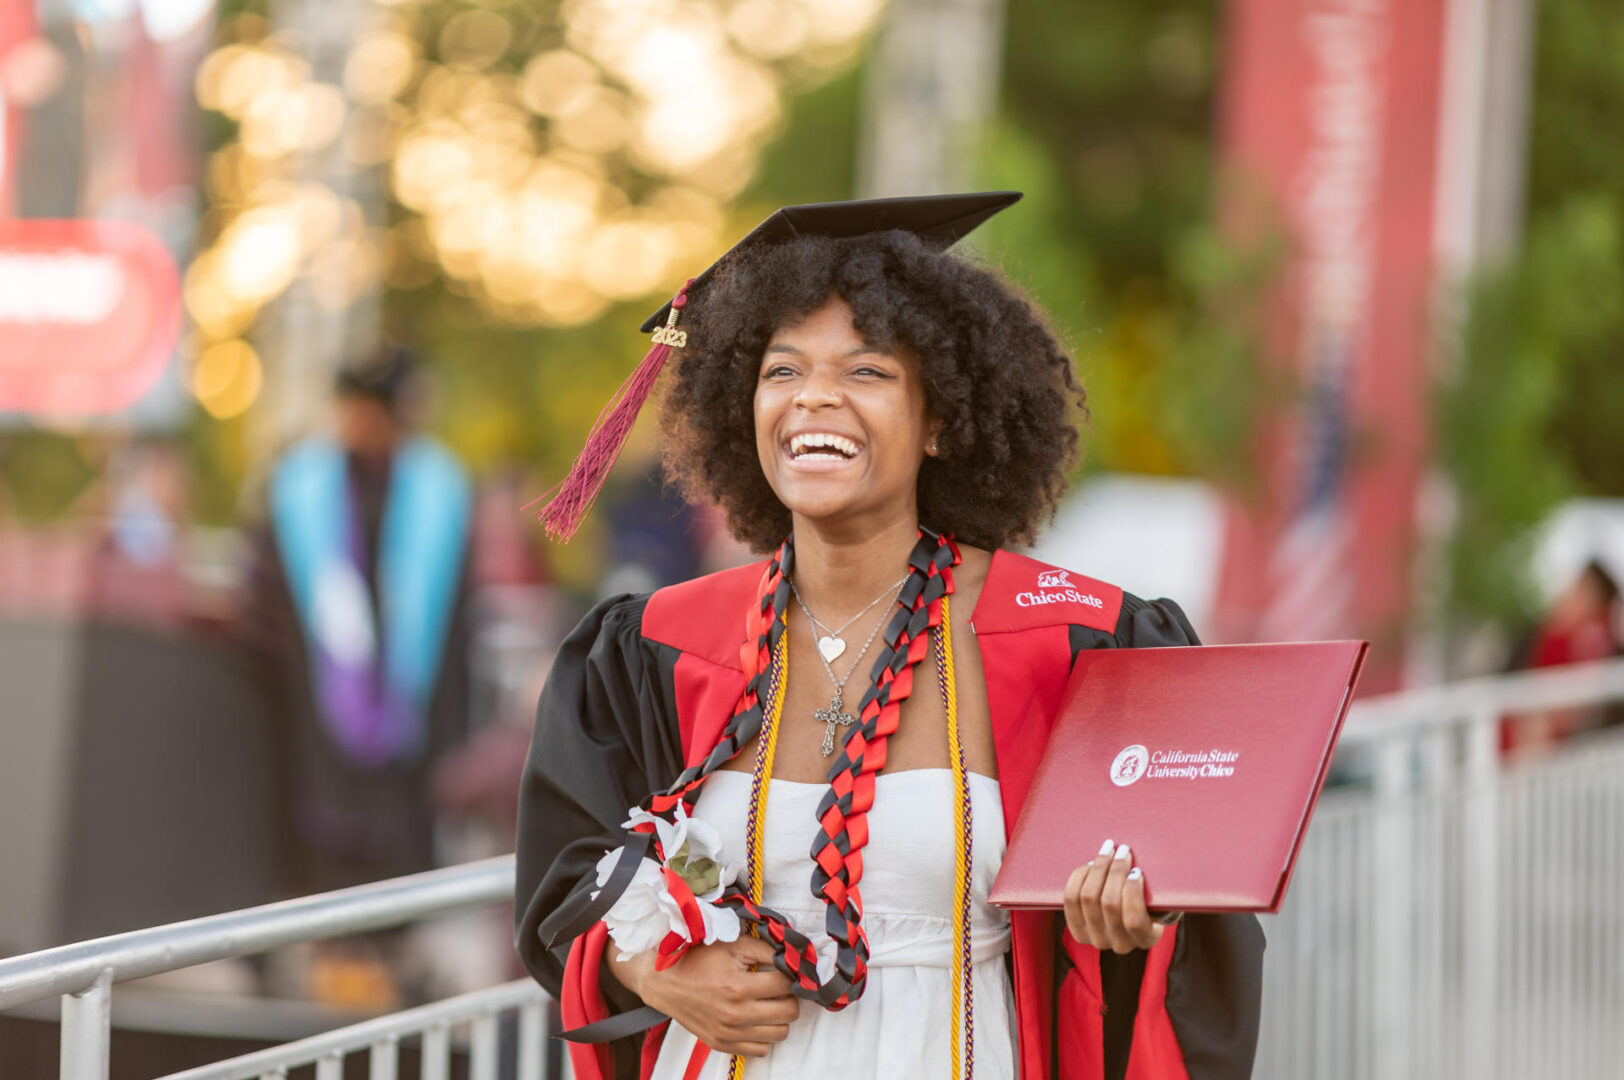 A college student holds her diploma and smiles as she celebrates graduating from college